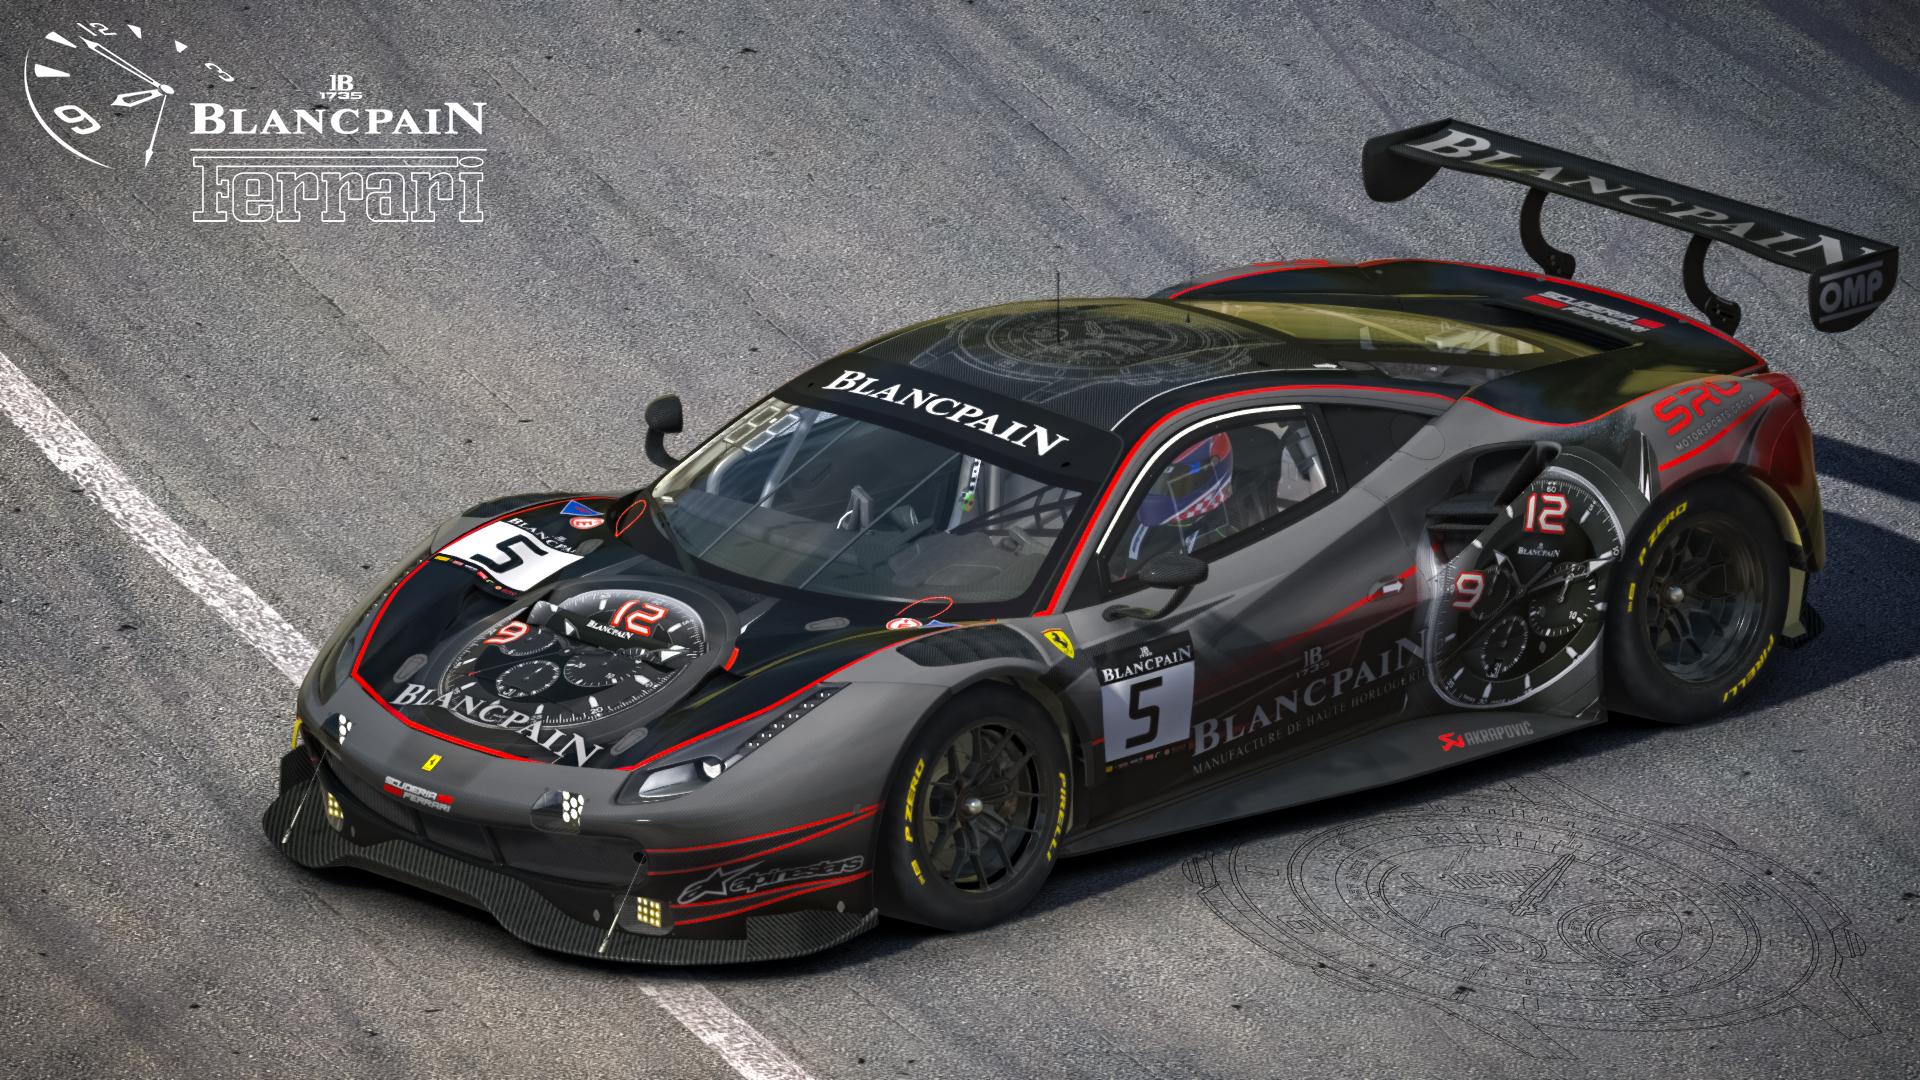 Preview of Blancpain Ferrari by Paul Mansell